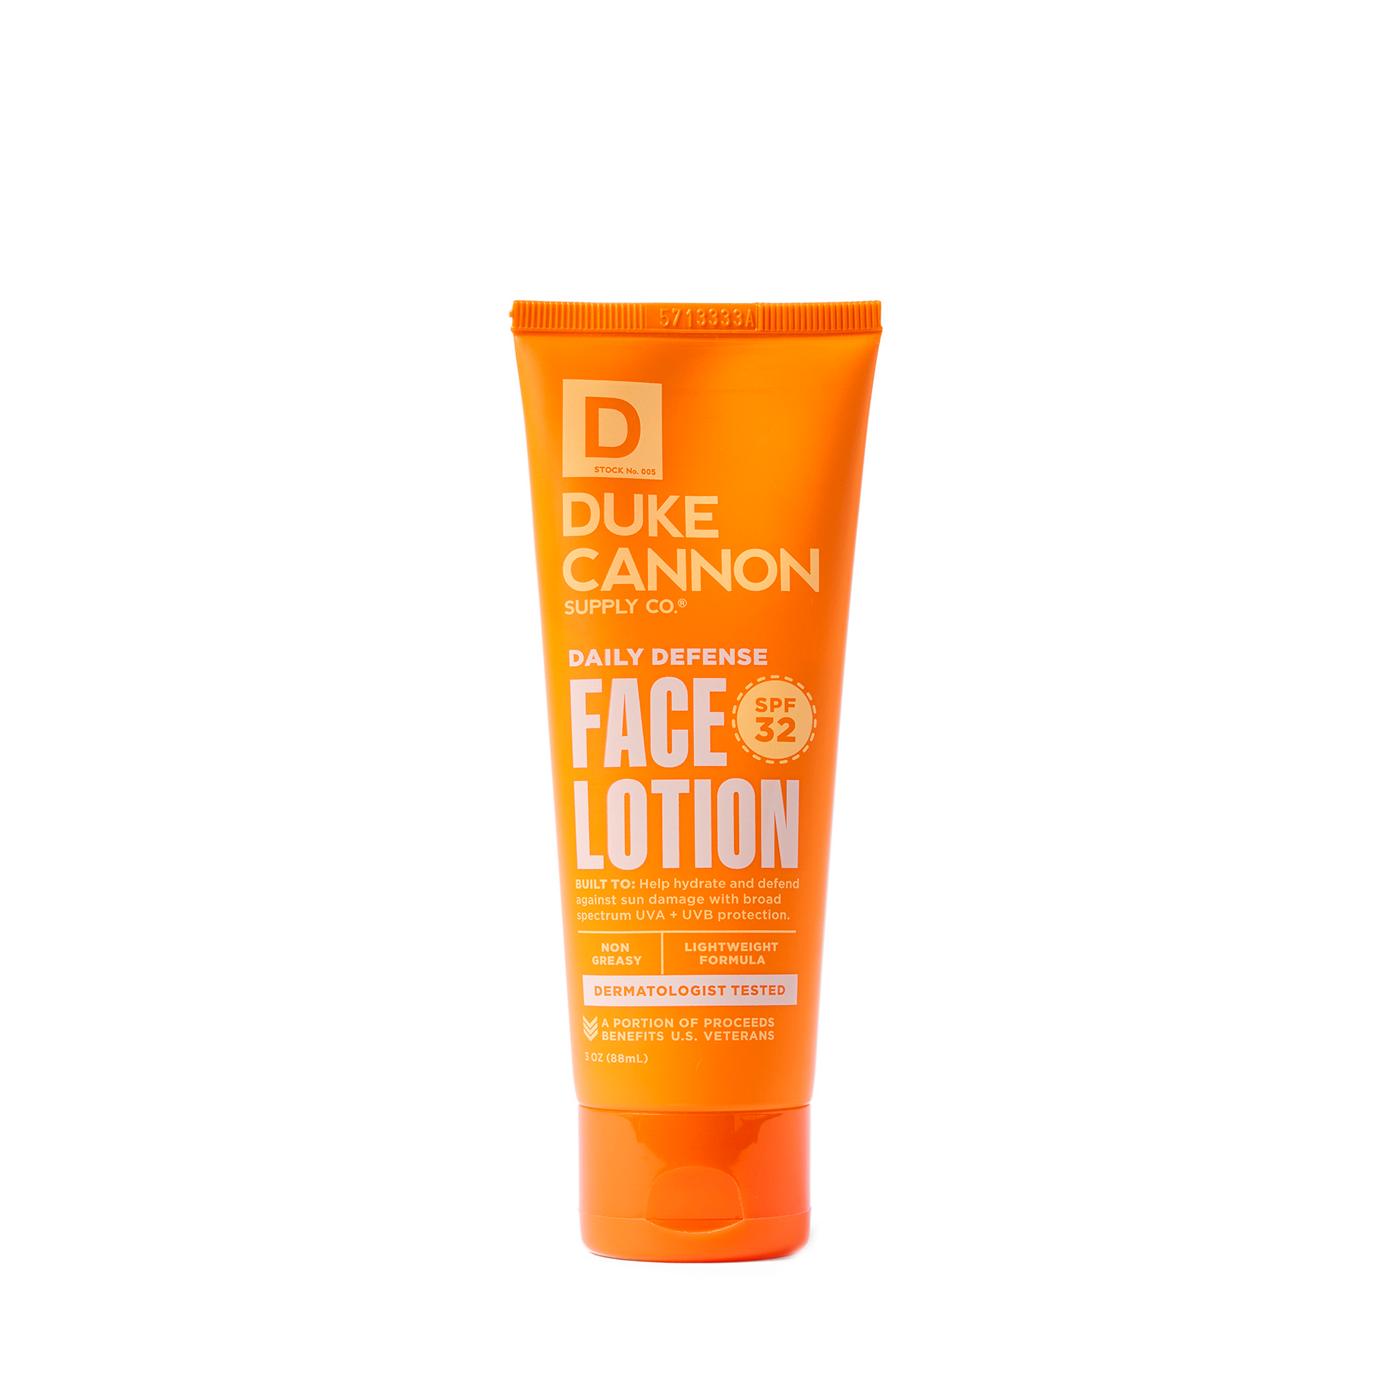 Duke Cannon Daily Defense Face Lotion; image 1 of 7